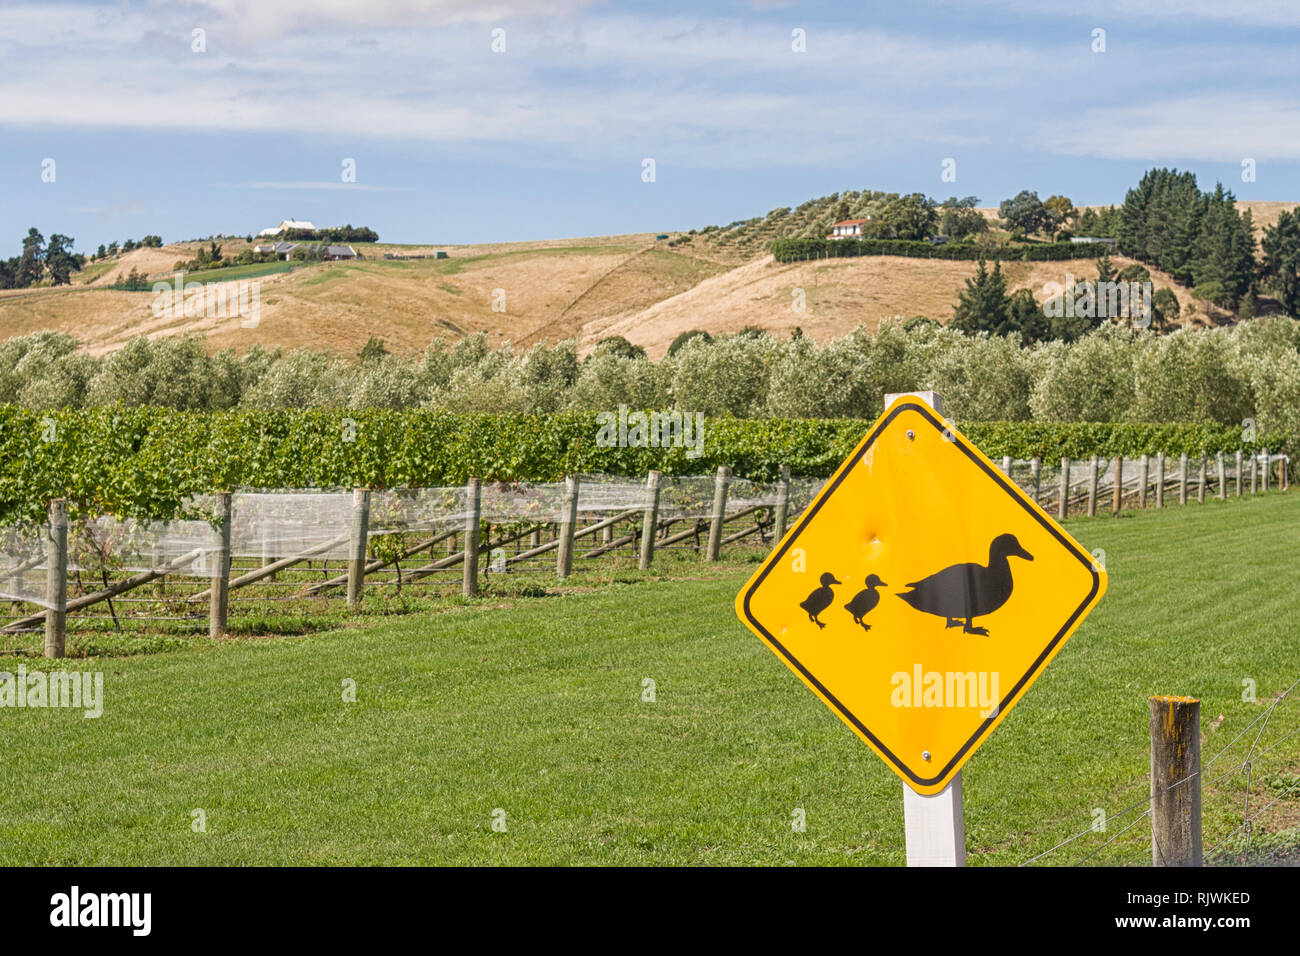 Road sign in New Zealand warning of ducks crossing Stock Photo